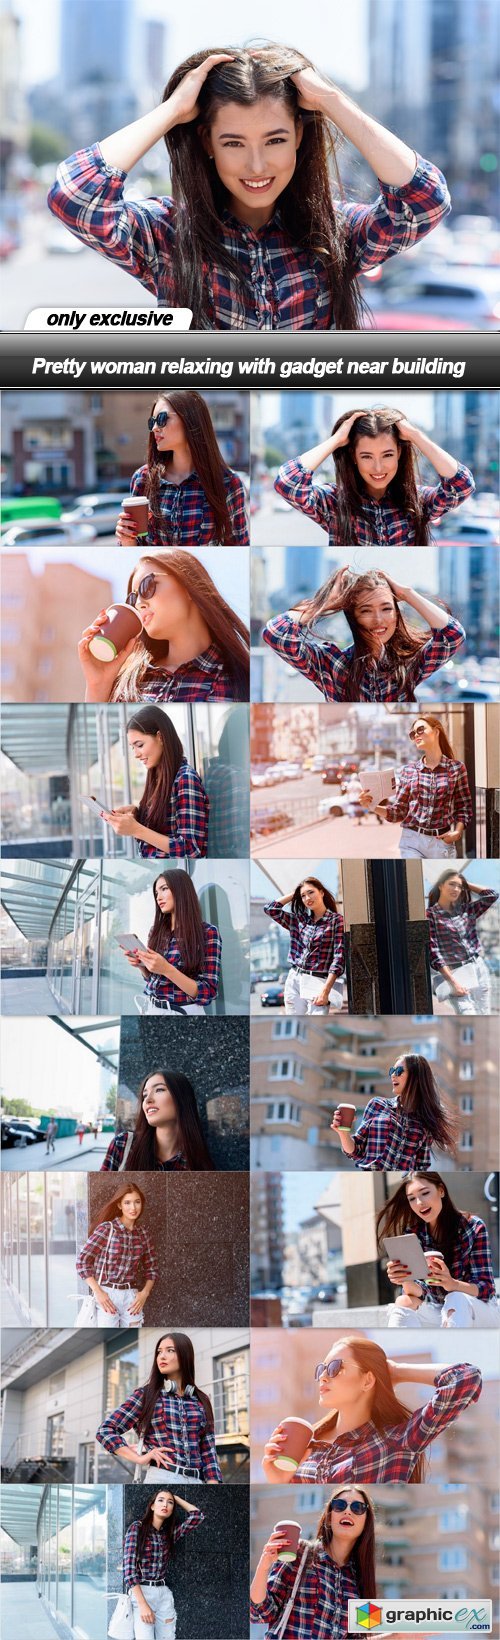 Pretty woman relaxing with gadget near building - 16 UHQ JPEG